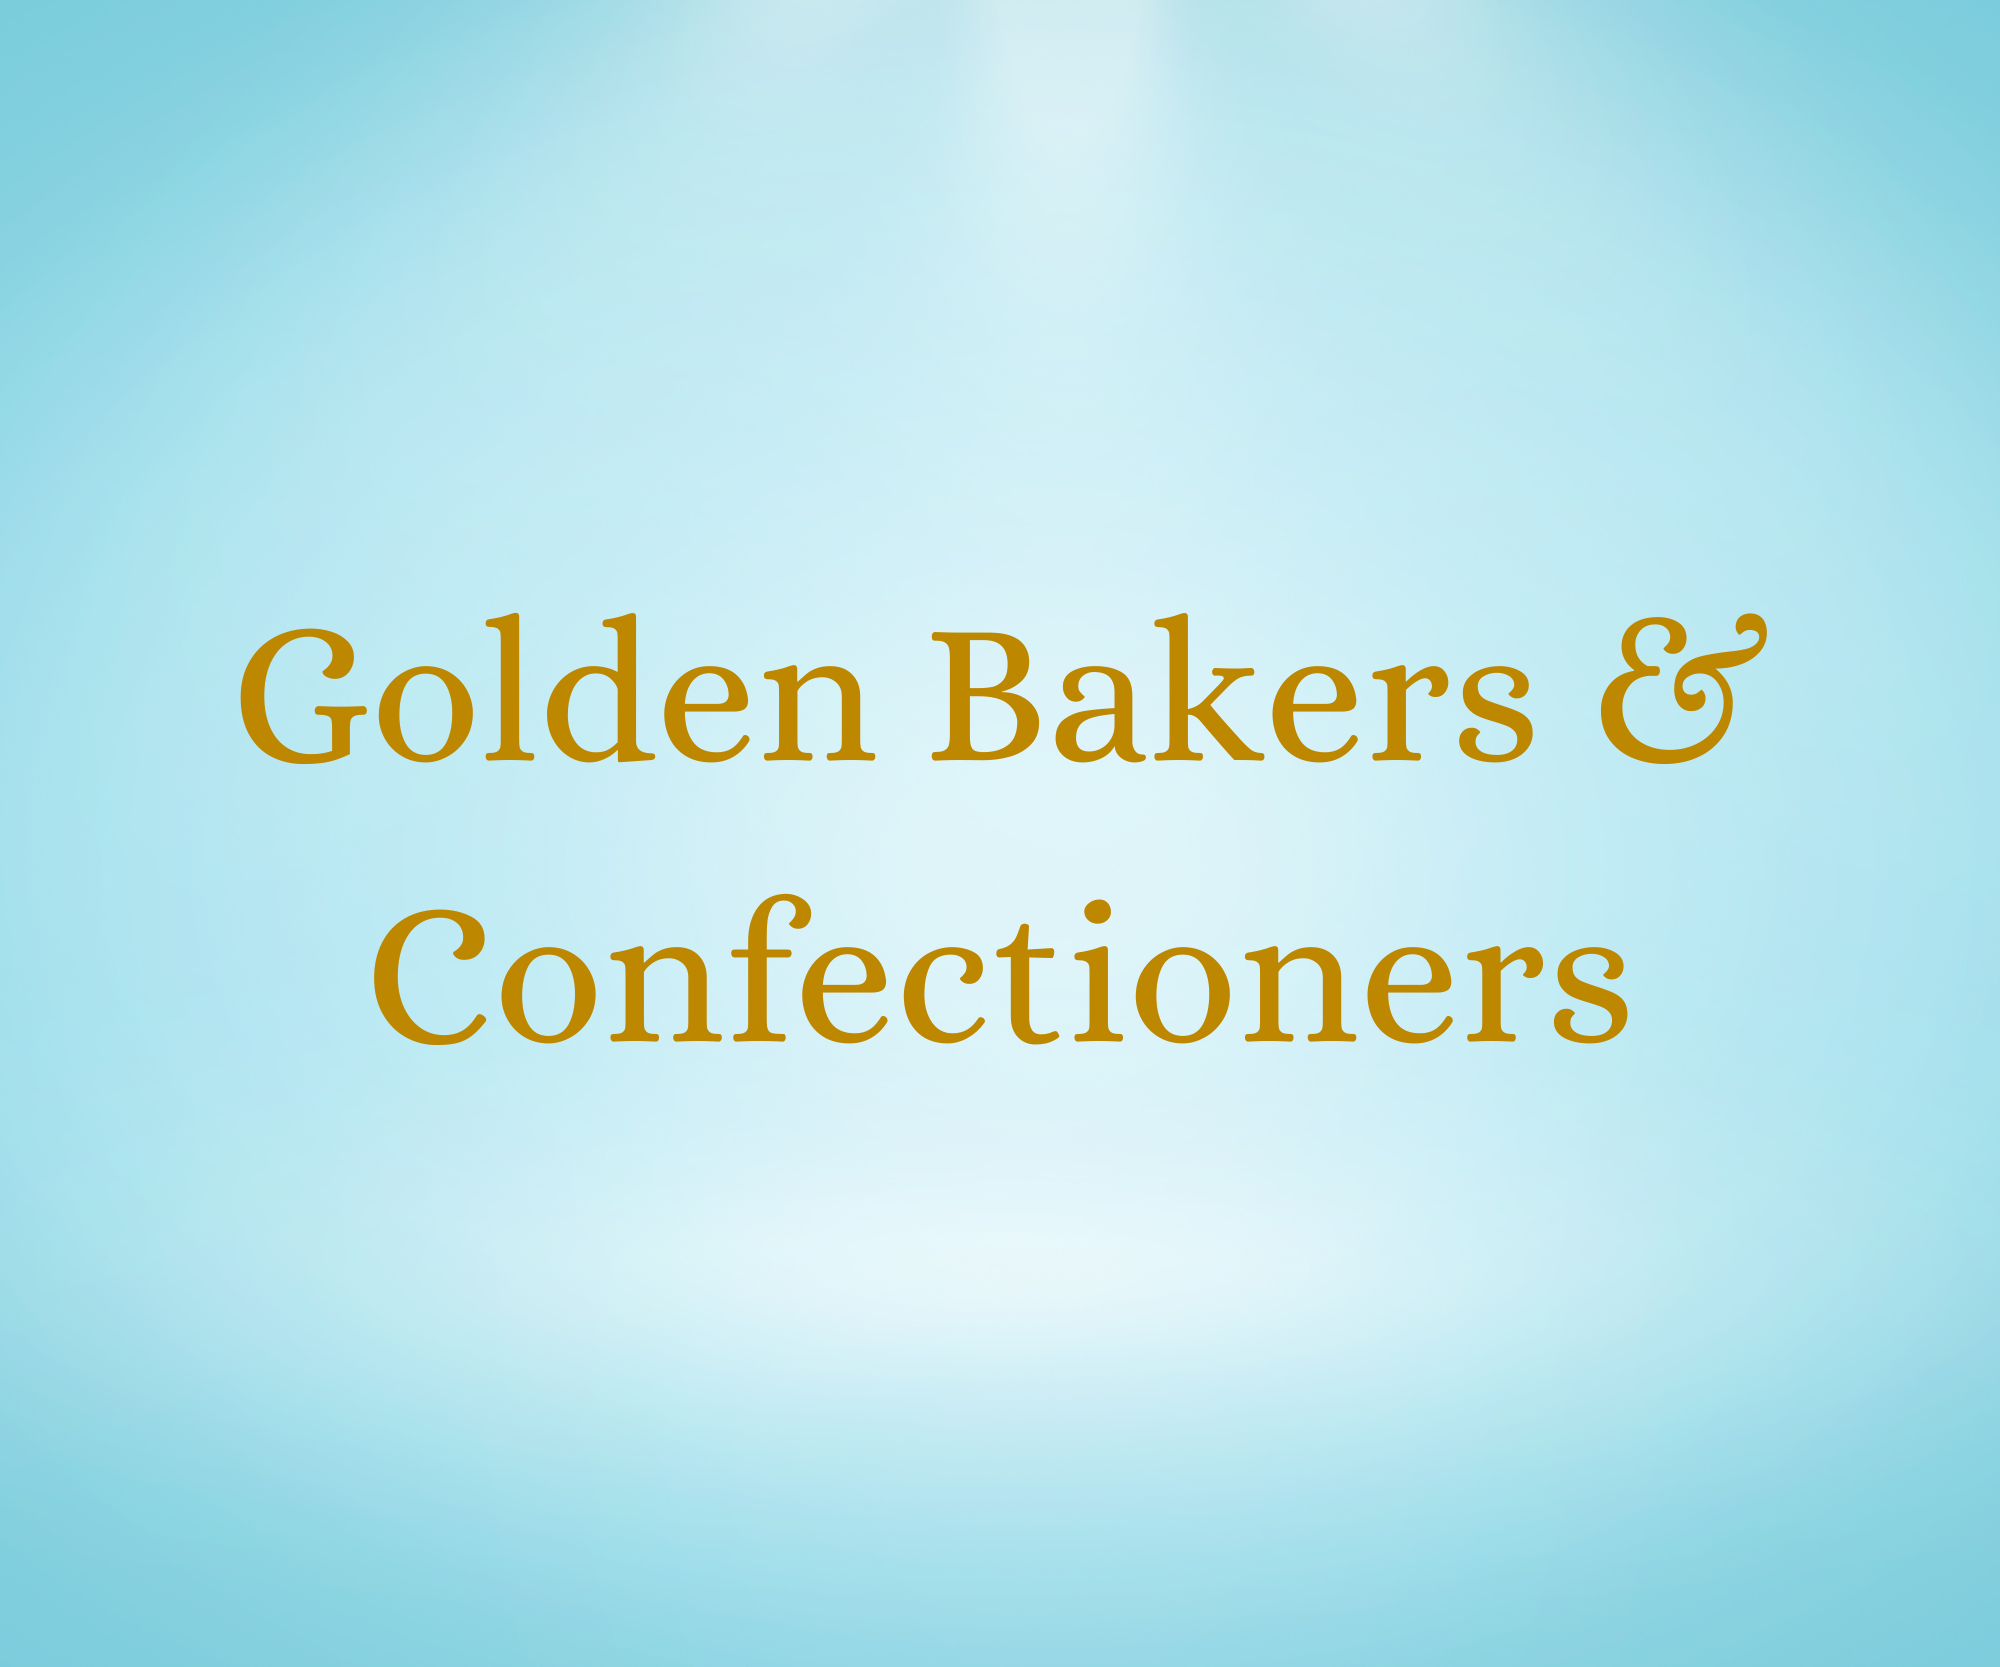 Golden Bakers & Confectioners 